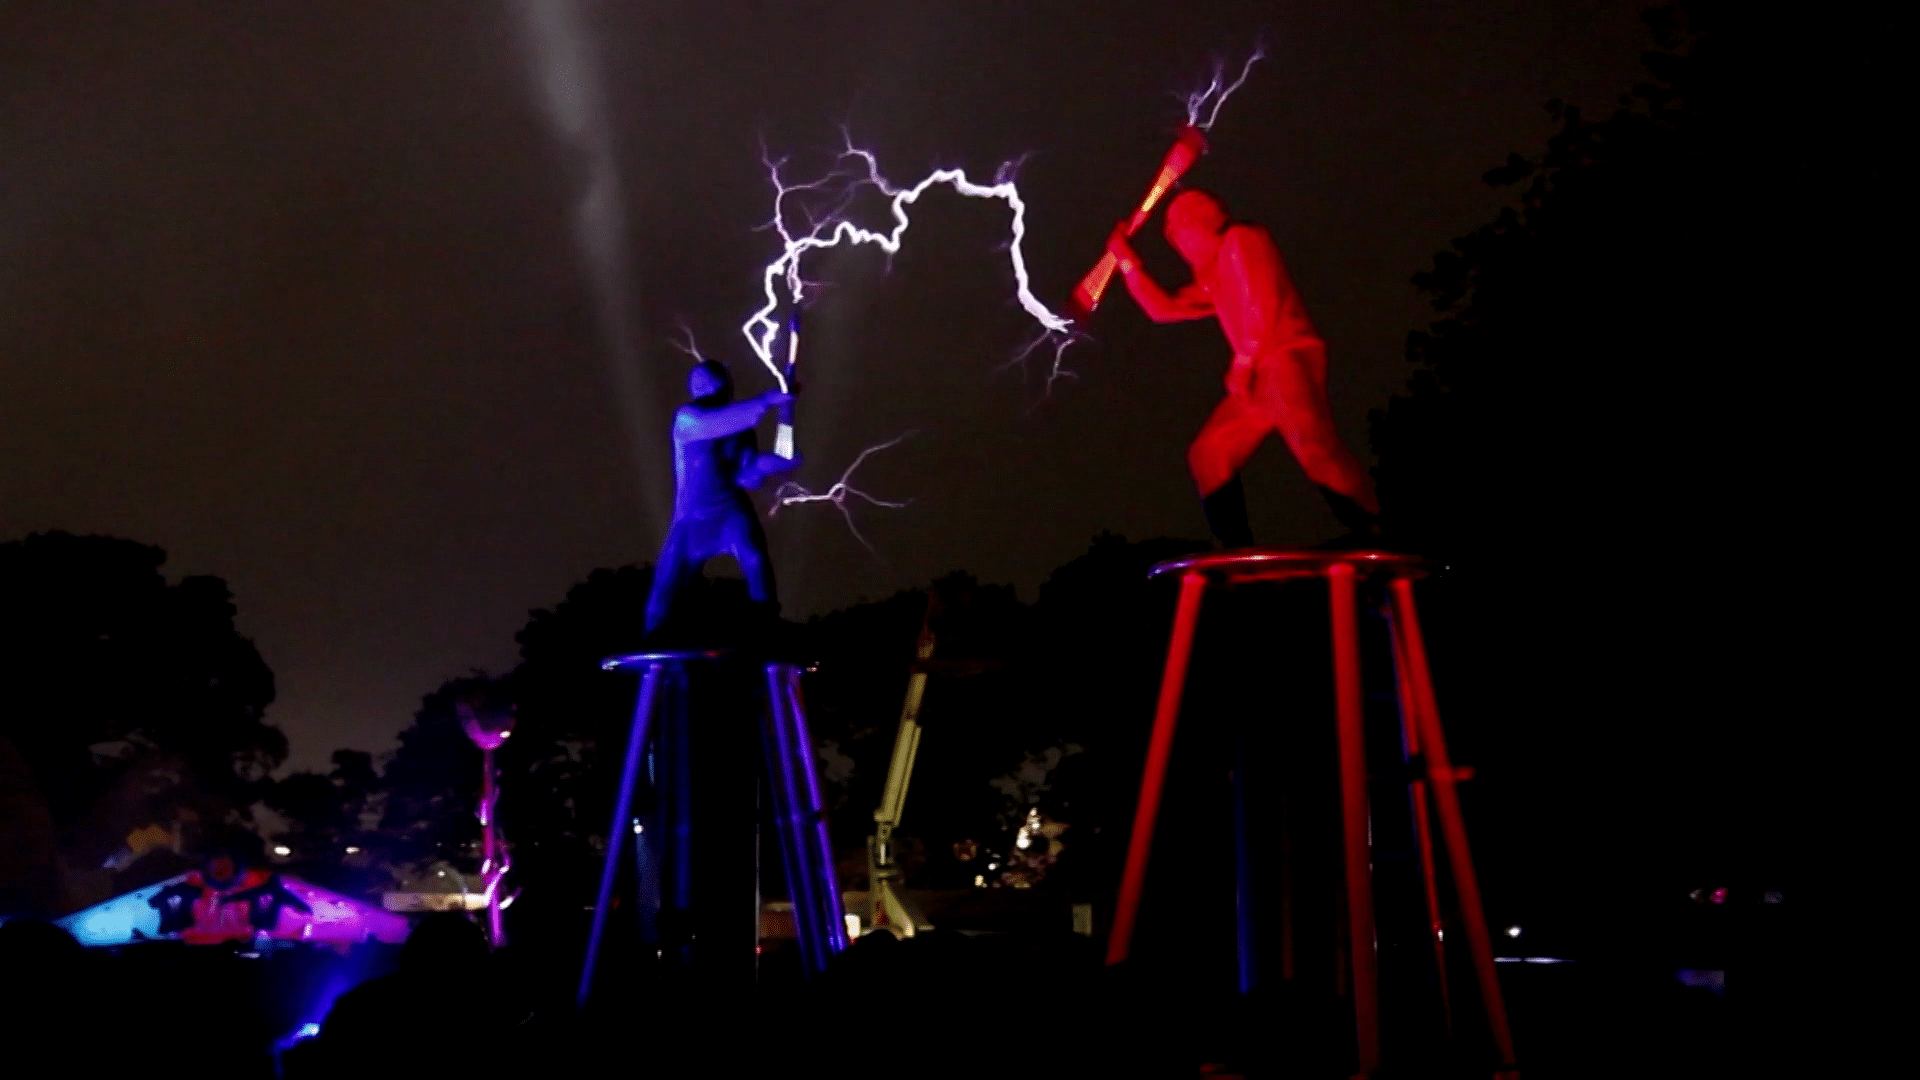 The amazing stunts, by the “Lords of Lightning”, have been performed all over the world from London and Europe. (Photo: AP screengrab)